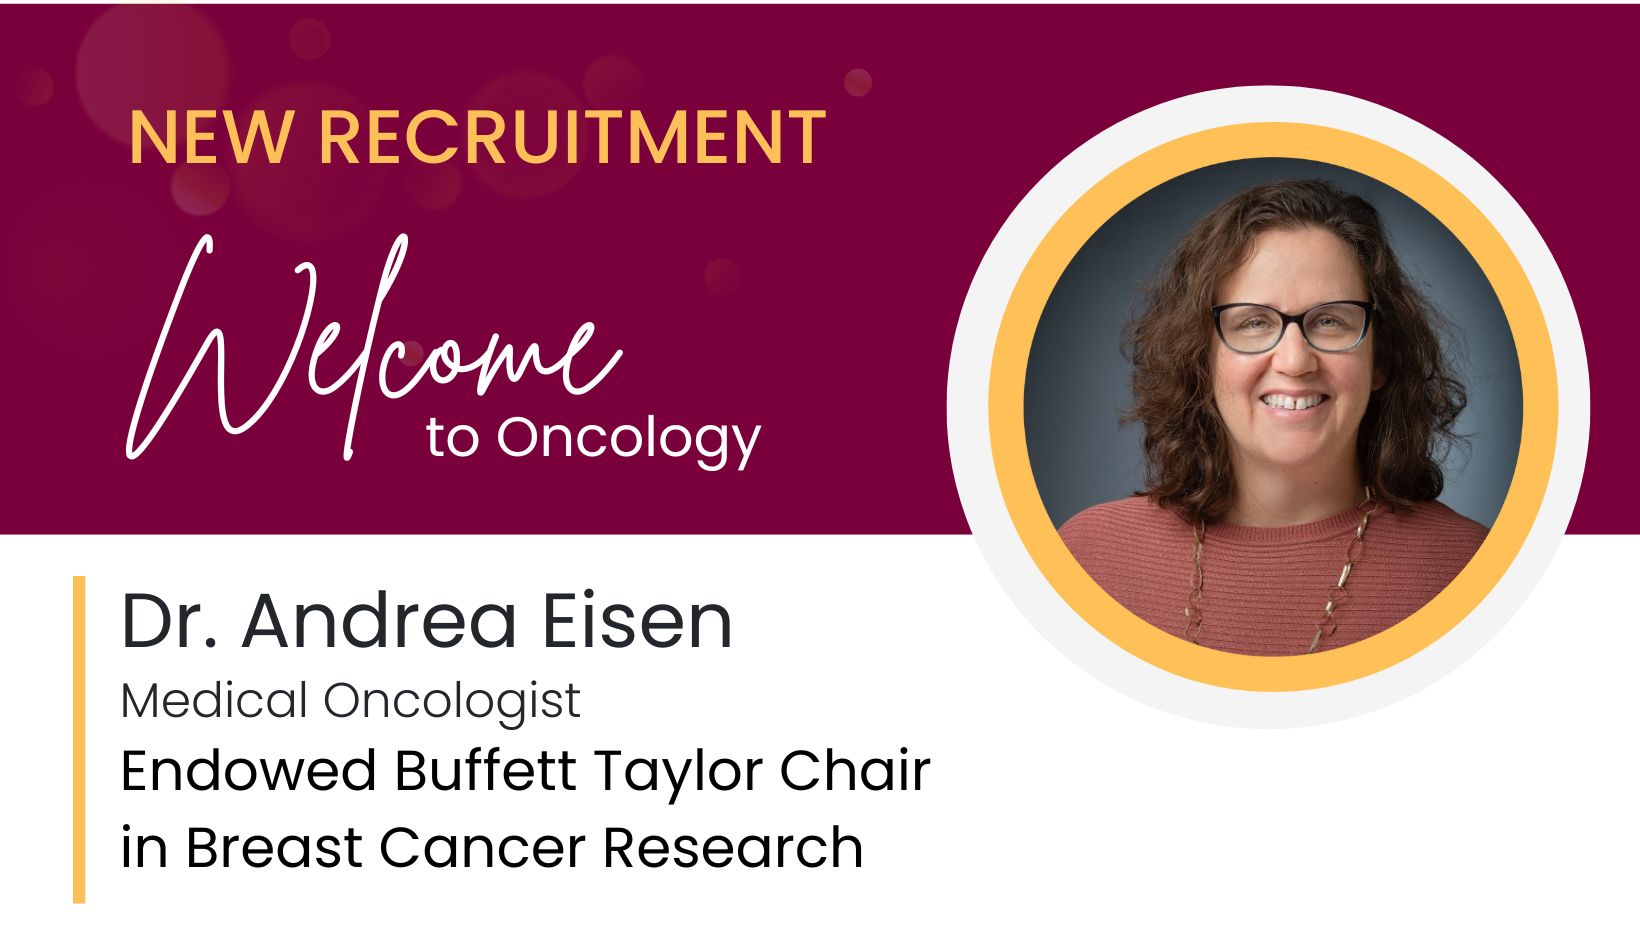 image of new recruitment announcement for Dr. Andrea Eisen, medical oncologist and endowed buffett taylor chair in breast cancer research joins the department of oncology at McMaster